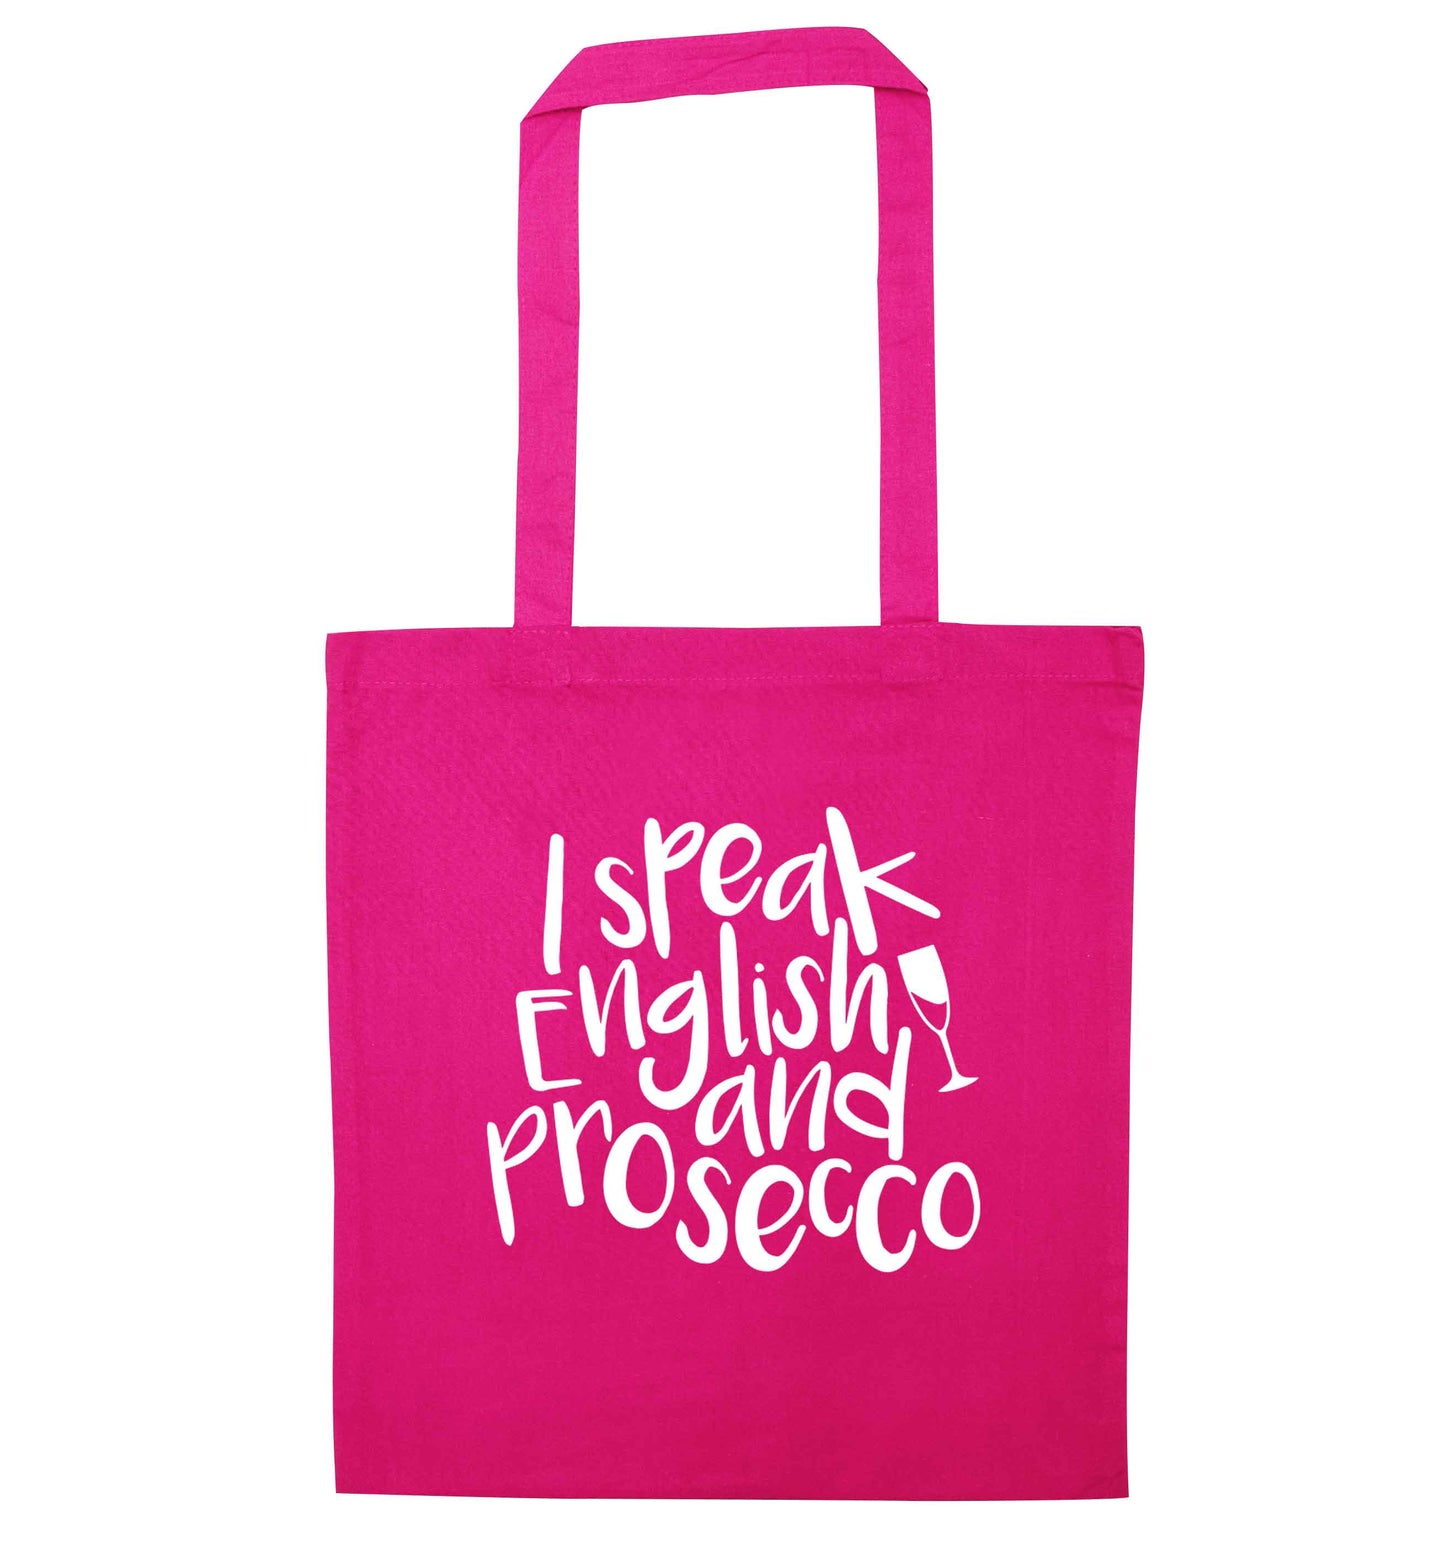 I speak English and prosecco pink tote bag